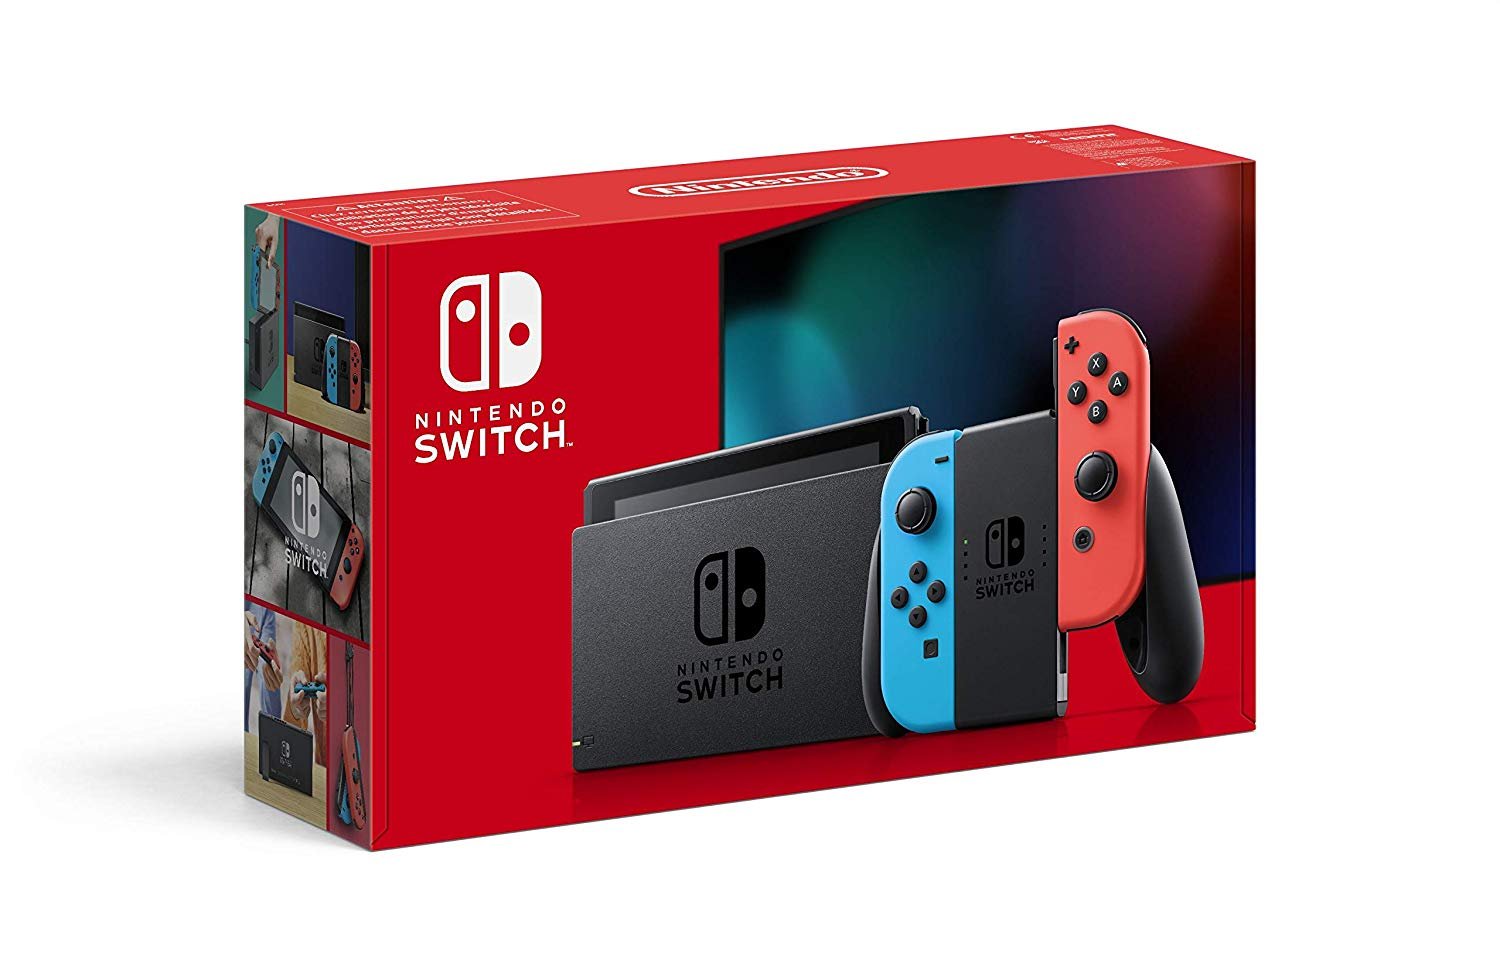 Best Nintendo Switch Accessory Deals: Your Buyer’s Guide For Joy-Con Grips, Accessories, Controllers, Cases, and More